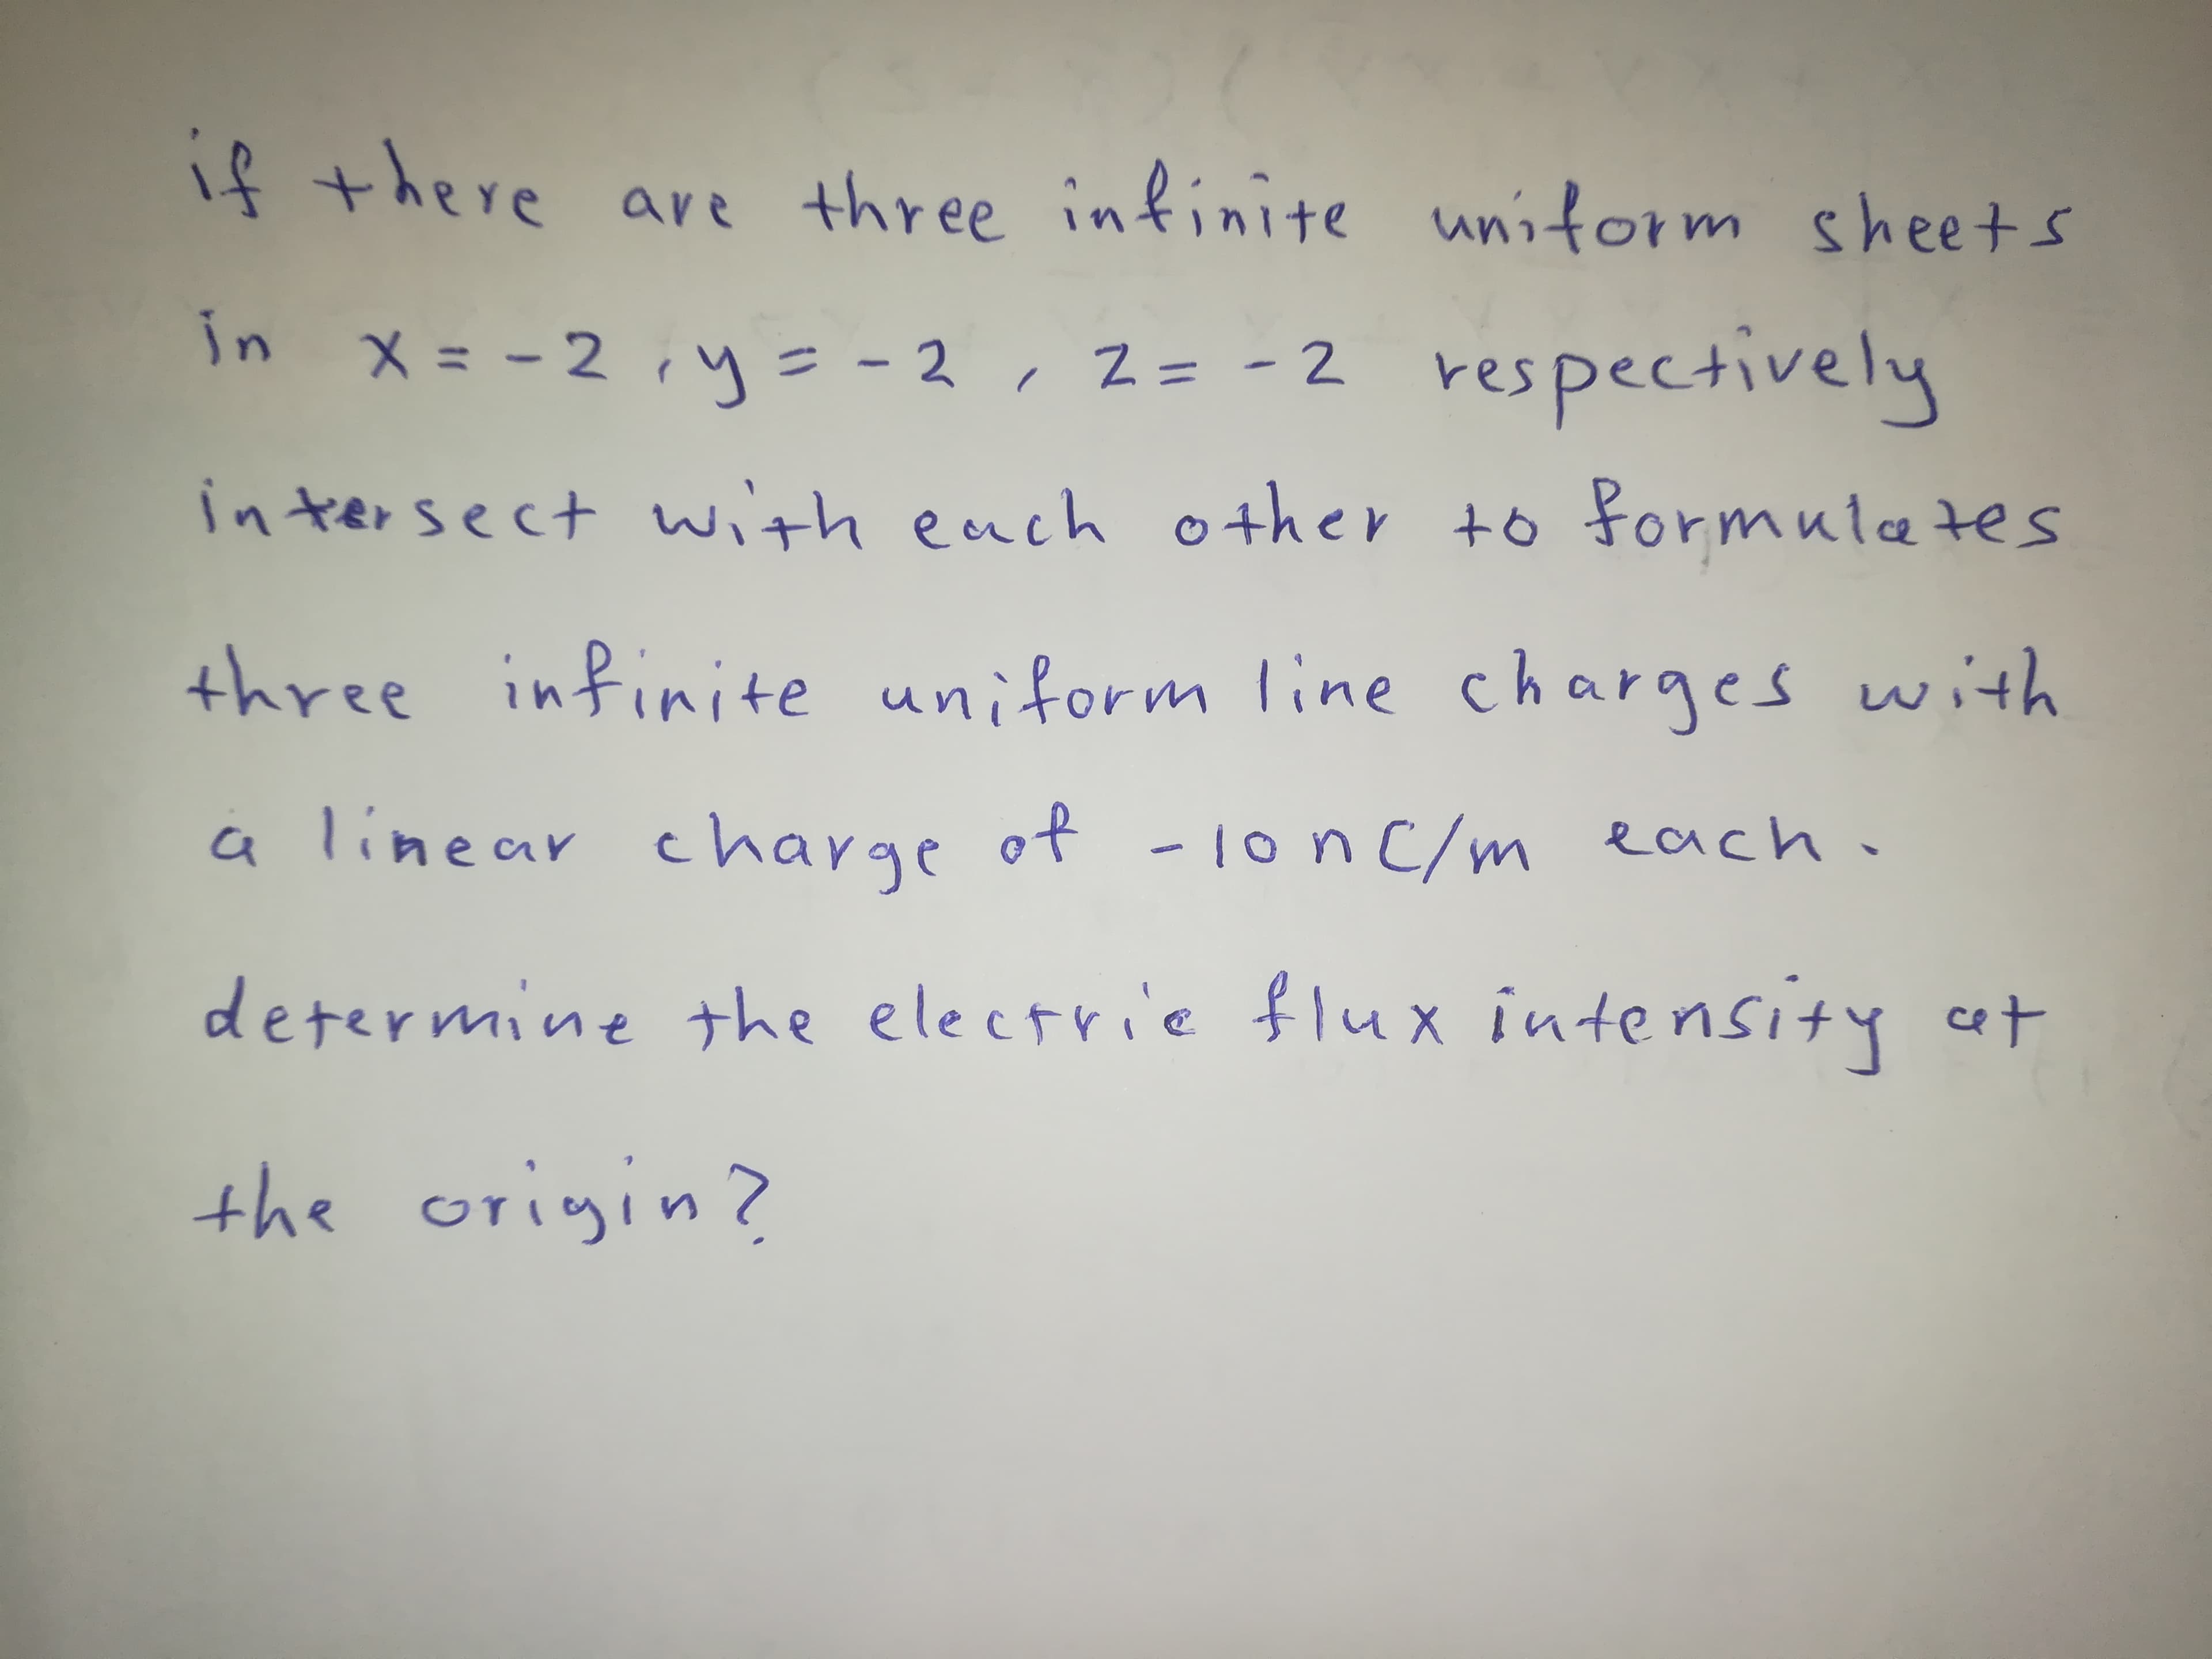 if there are three infinite unitorm sheets
in x= -2, y= - 2, 2= -2 respectively
メ= -2
|
in tersect with each other to formuletes
three infinite uniform line charges with
a linear charge of -1on C/m each.
determine the electrie flux intensity cat
the origin?
